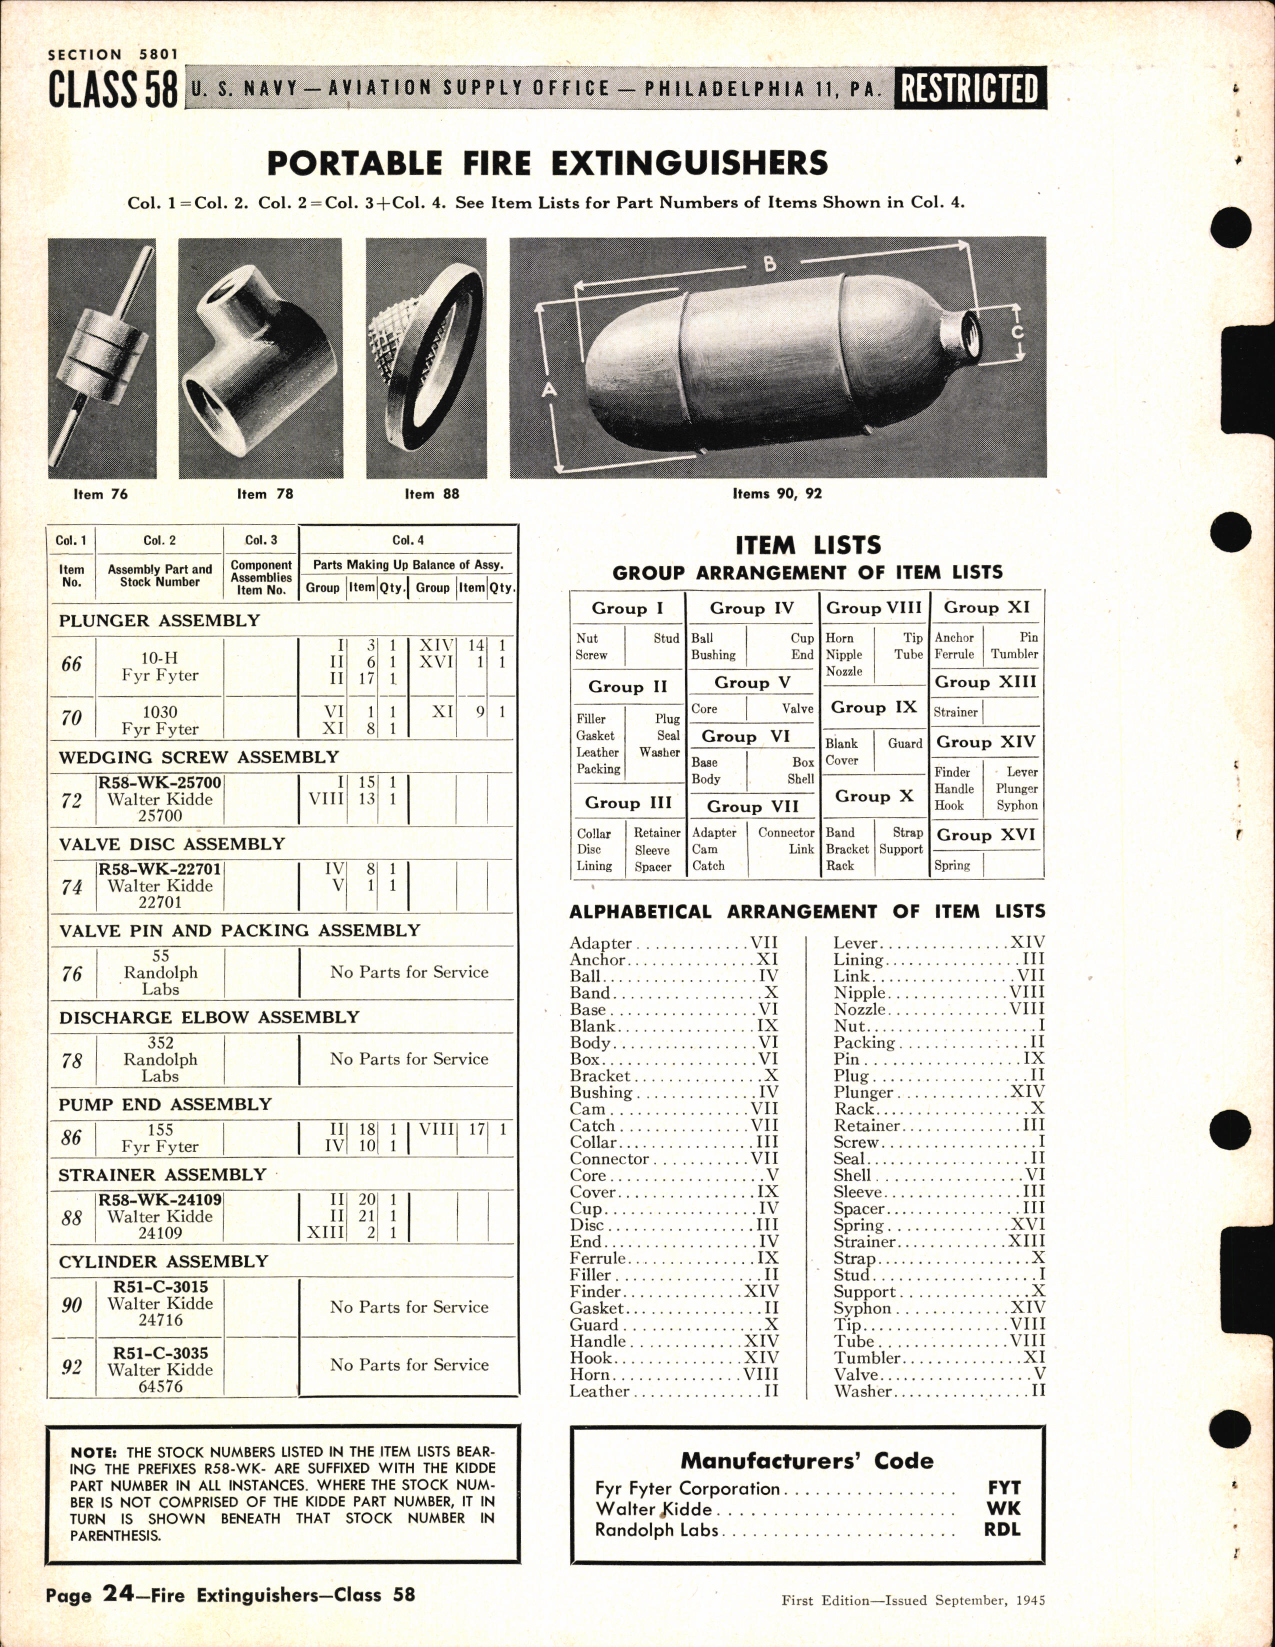 Sample page 24 from AirCorps Library document: Fire Extinguishers and Parts